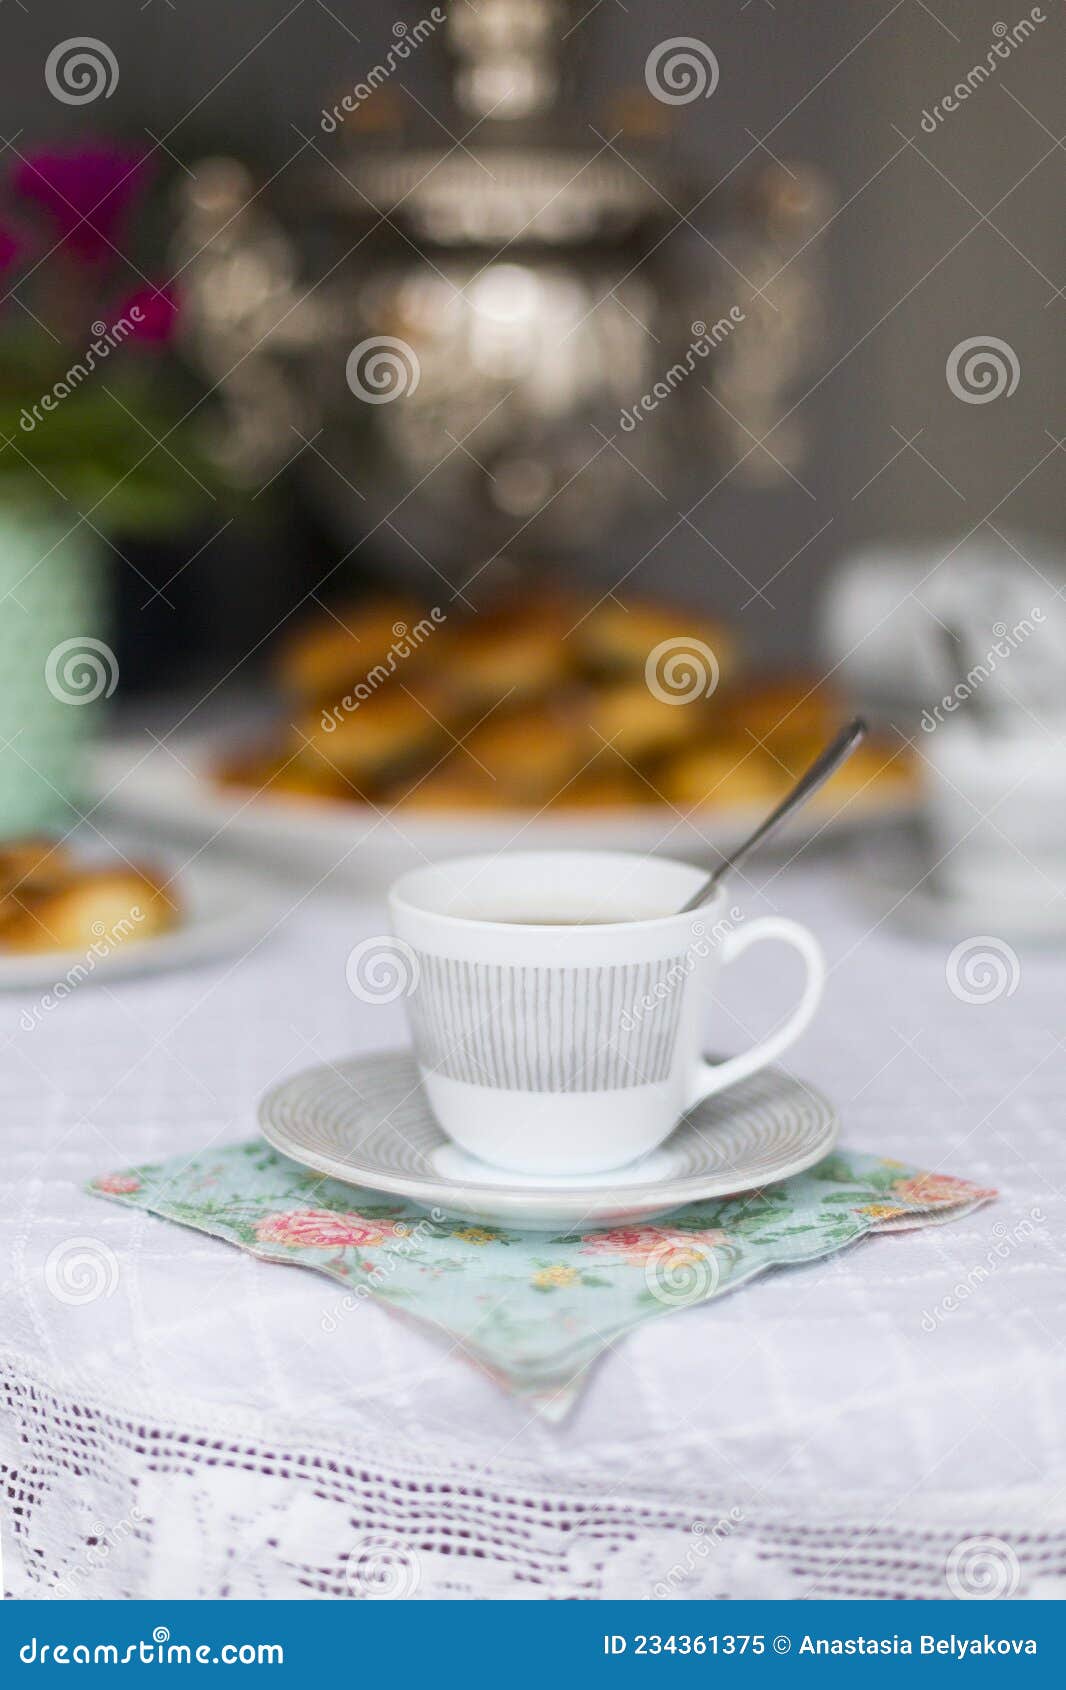 russian traditional teaparty with samovar and pies or pirozhki with apple jam